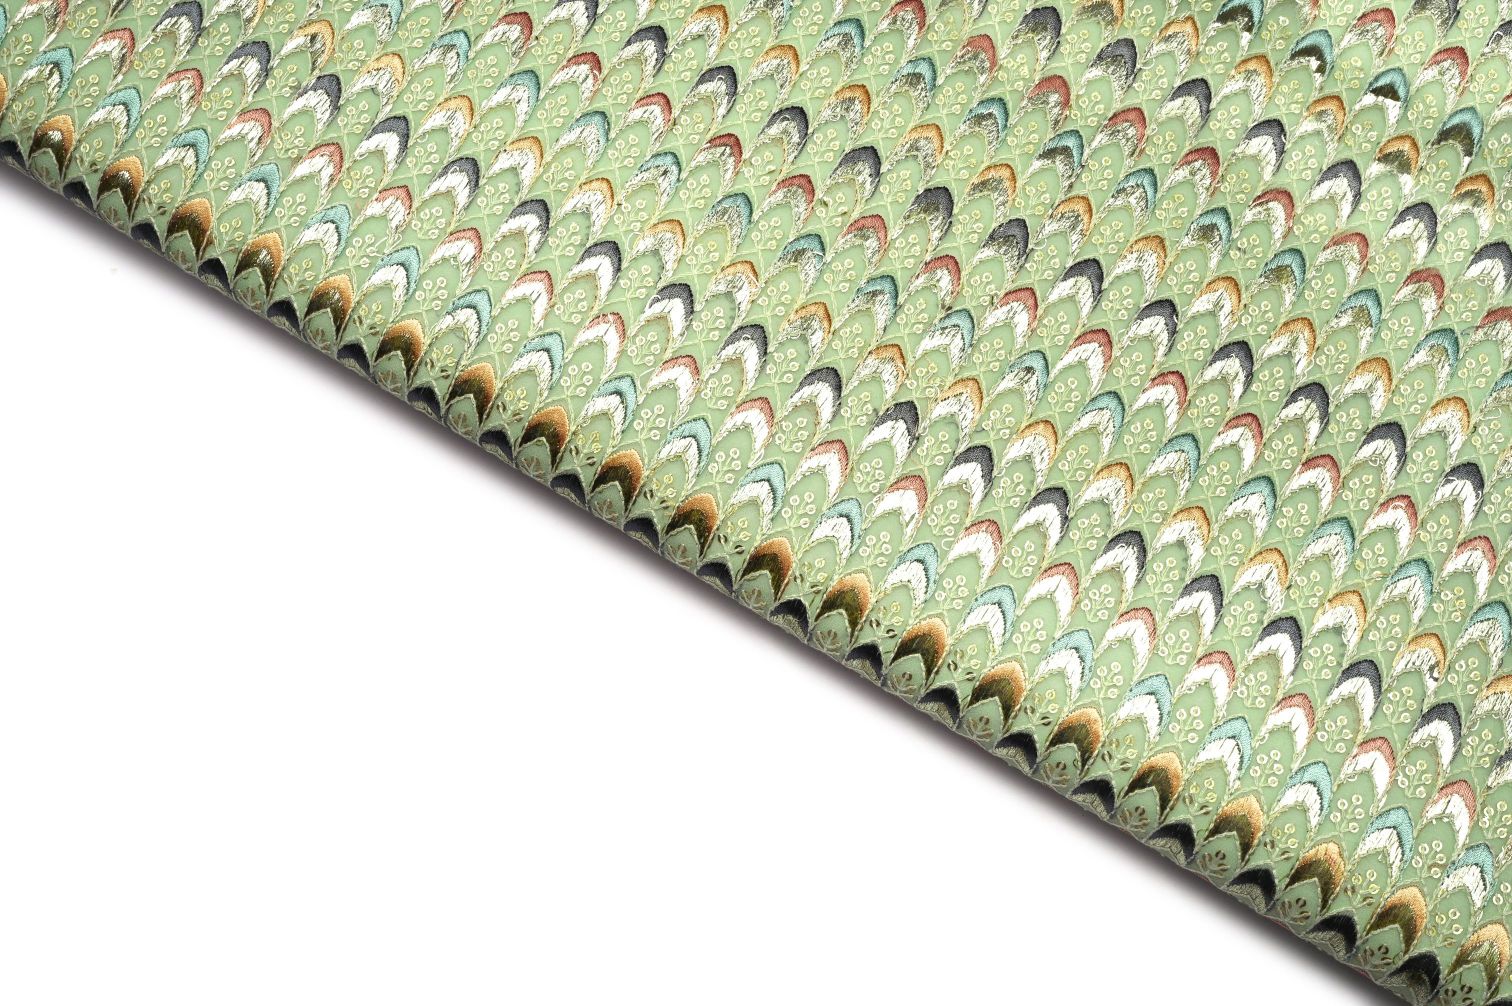 SPRING PISTA GREEN COLOR GEORGET METALIC FOIL WITH MULTIPLE SHADES RESHAM ARROW PATTERN EMBROIDERED WORK FABRIC 10925